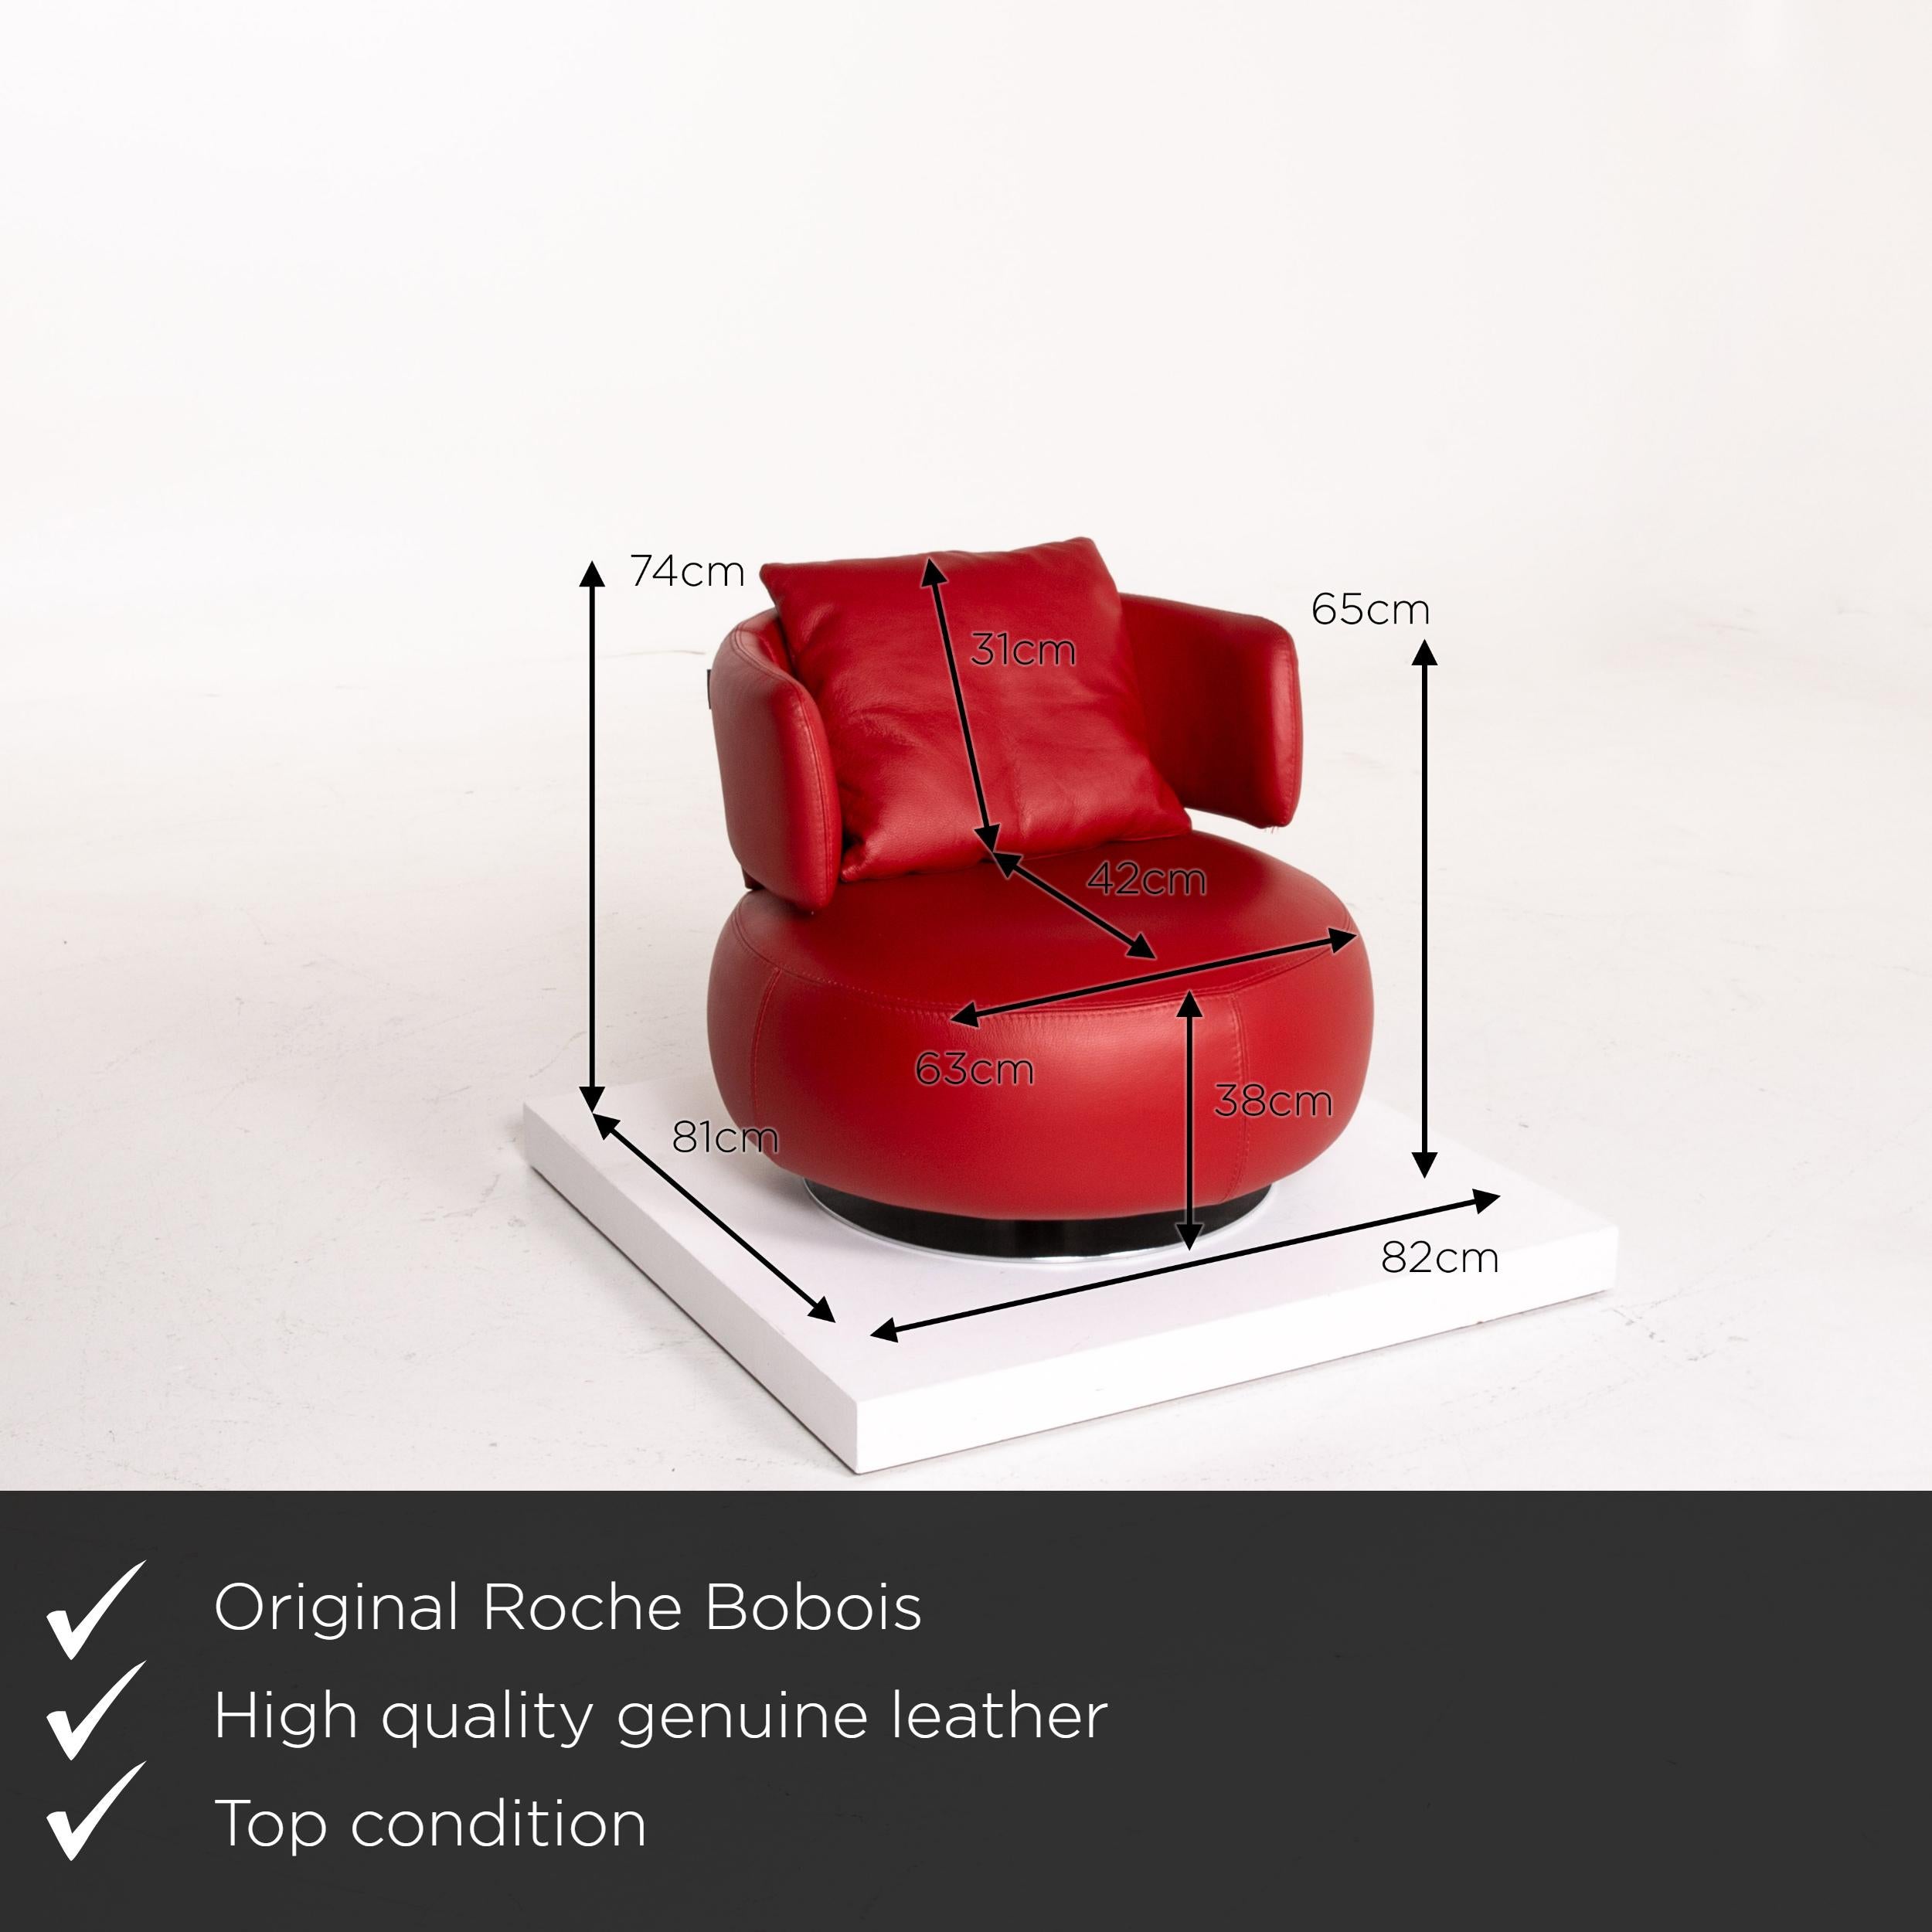 We present to you a Roche Bobois curl leather armchair red swivel.

Product measurements in centimeters:

Depth 81
Width 82
Height 74
Seat height 38
Rest height 65
Seat depth 42
Seat width 63
Back height 31.
 
 
   